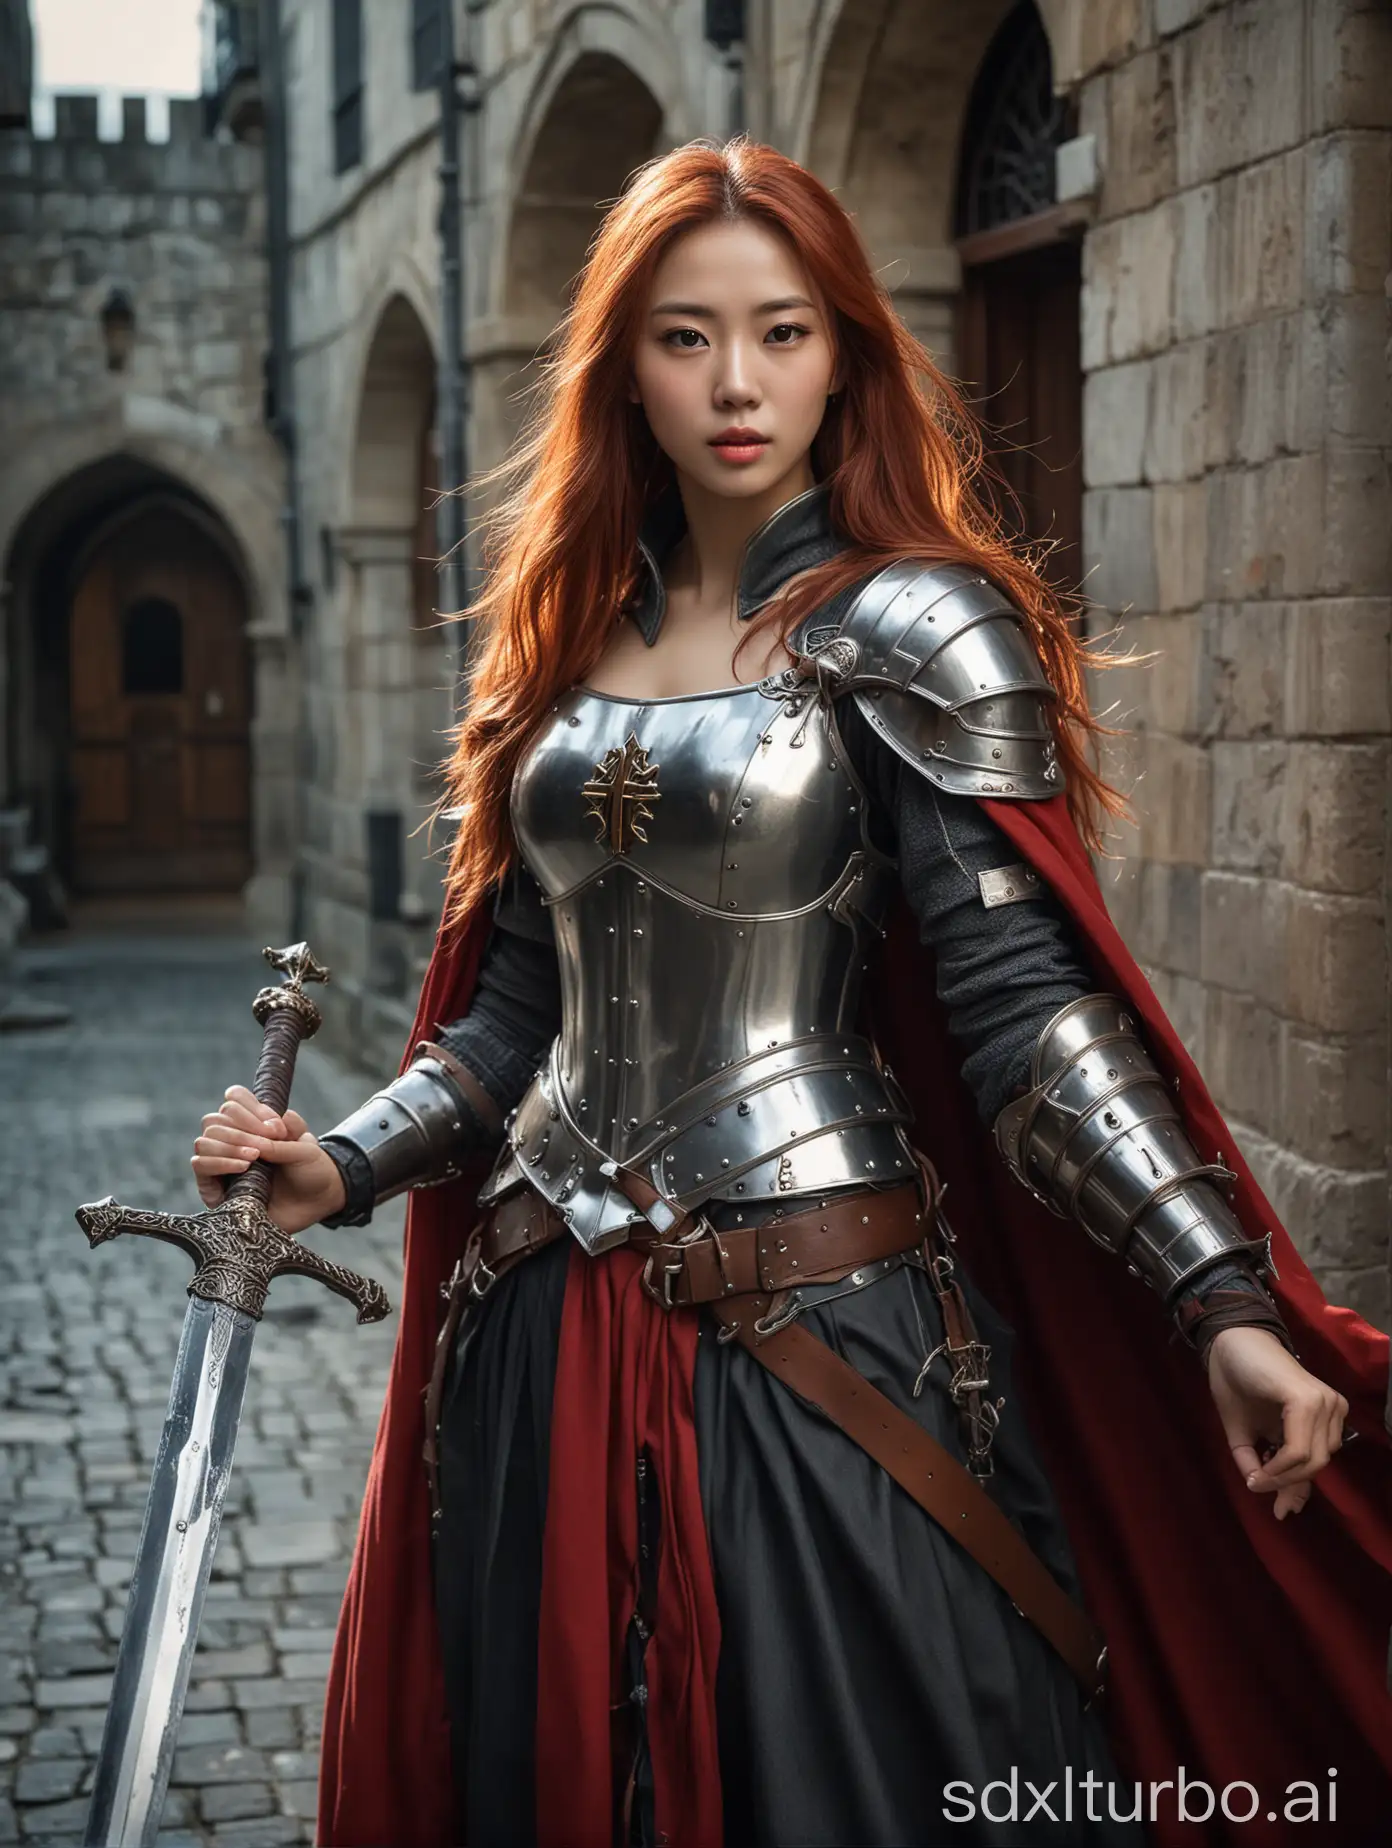 Taiwanese-Singer-as-Medieval-Knight-Beauty-in-Knights-Hospitaller-Costume